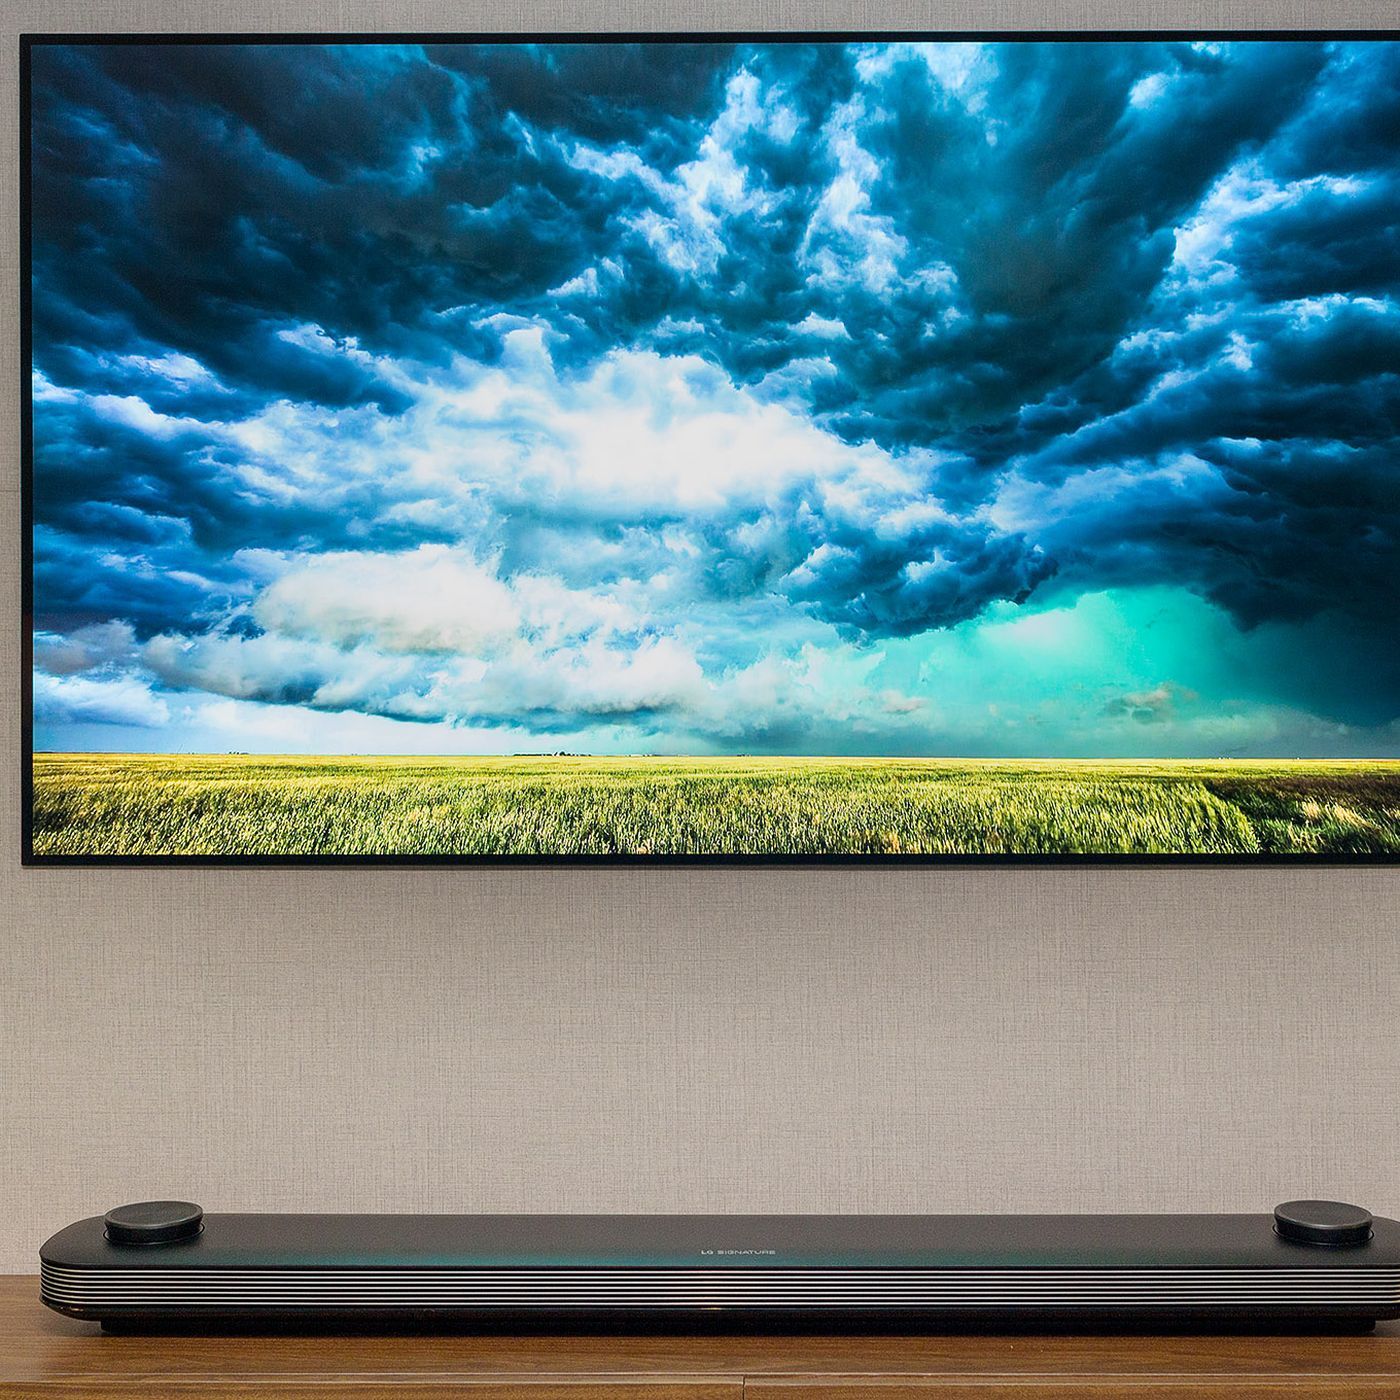 LG's New 77 Inch OLED Wallpaper TV Is Now Available For The Price